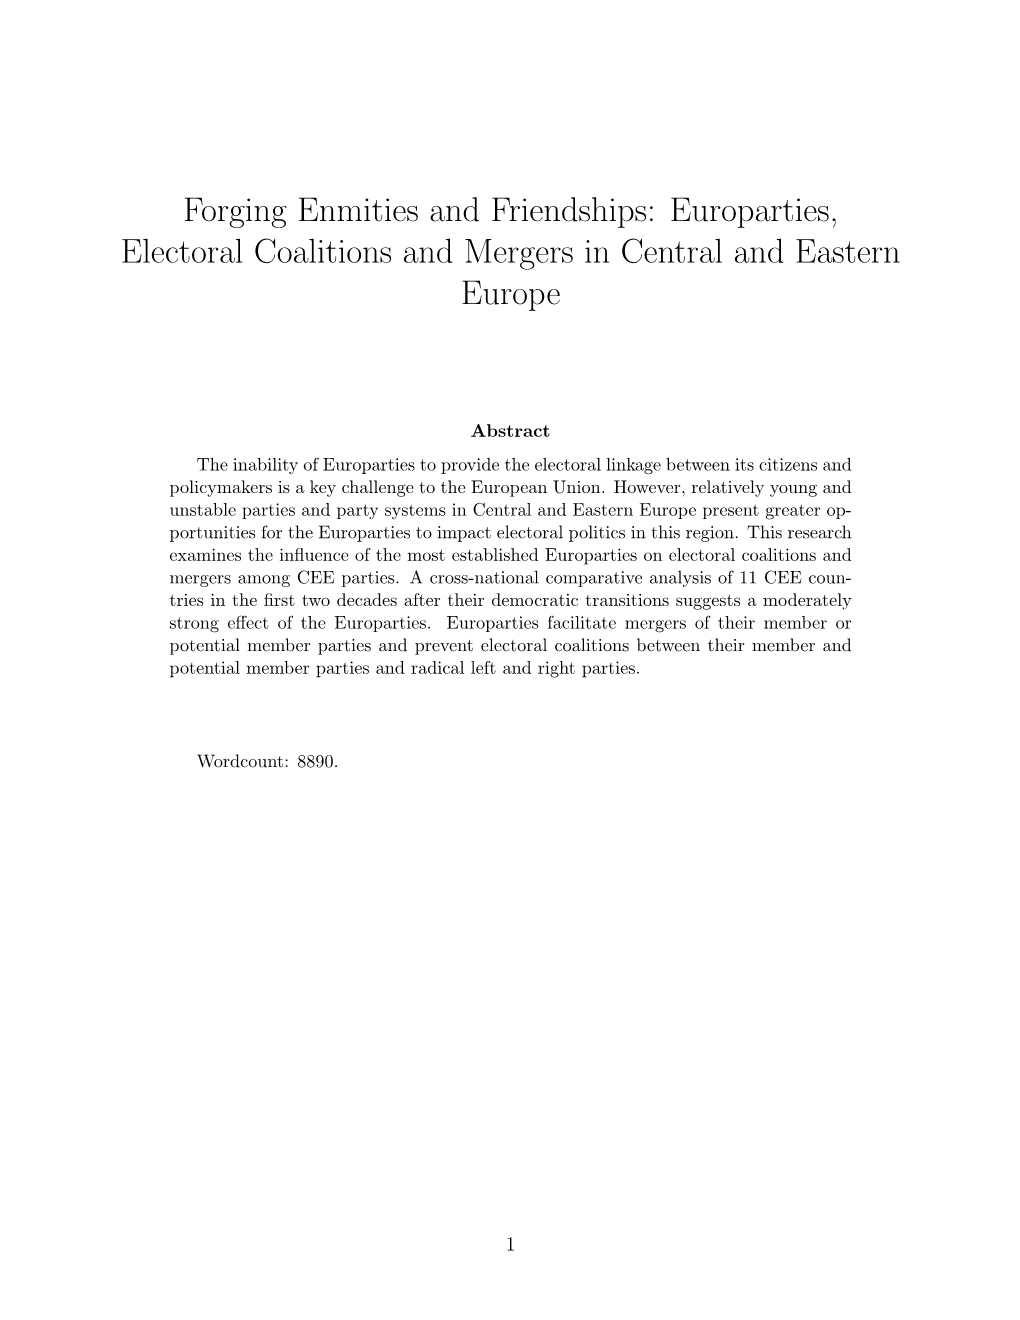 Forging Enmities and Friendships: Europarties, Electoral Coalitions and Mergers in Central and Eastern Europe